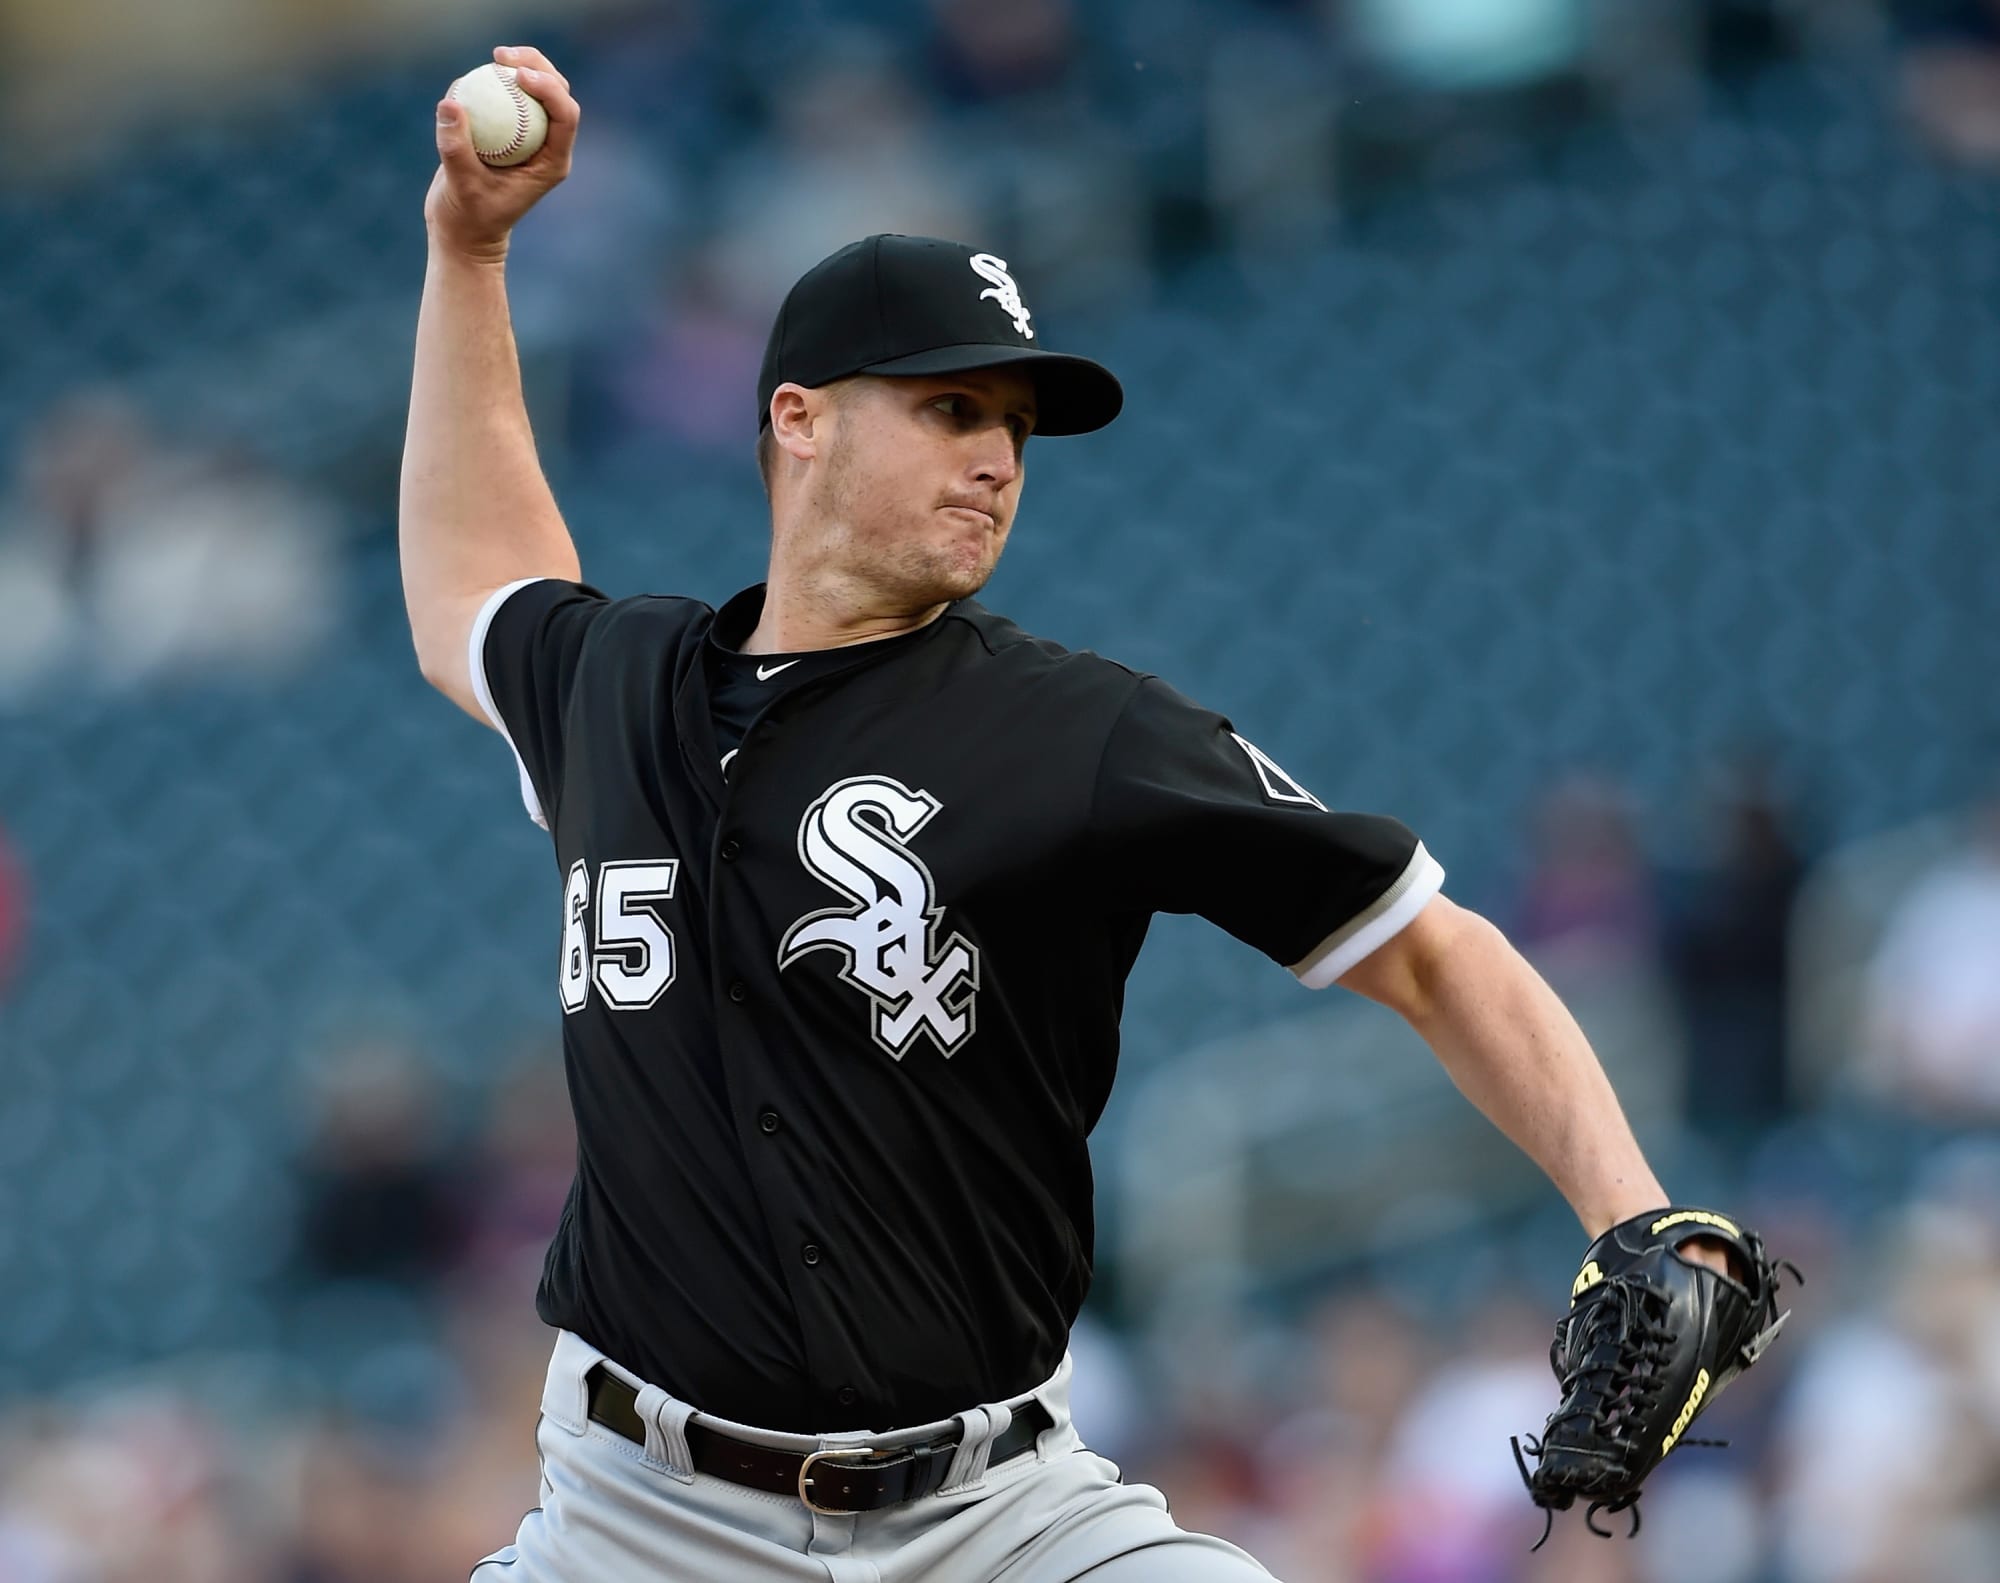 White Sox Who Will Be Future Closer on South Side?